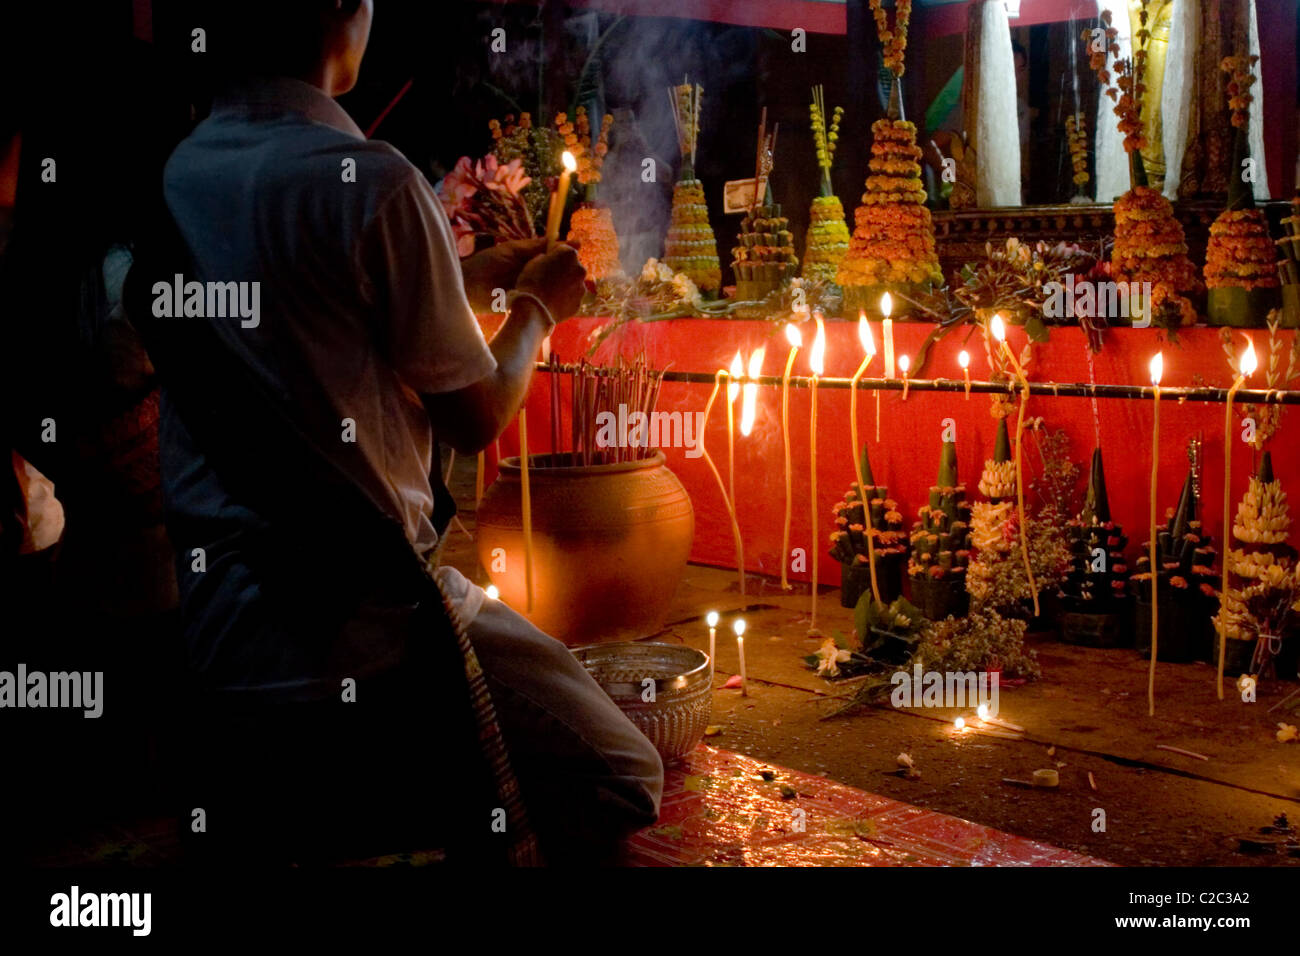 People are gathered with candles to pay tribute to the Pra Bang Buddha at a Buddhist temple in communist Laos. Stock Photo